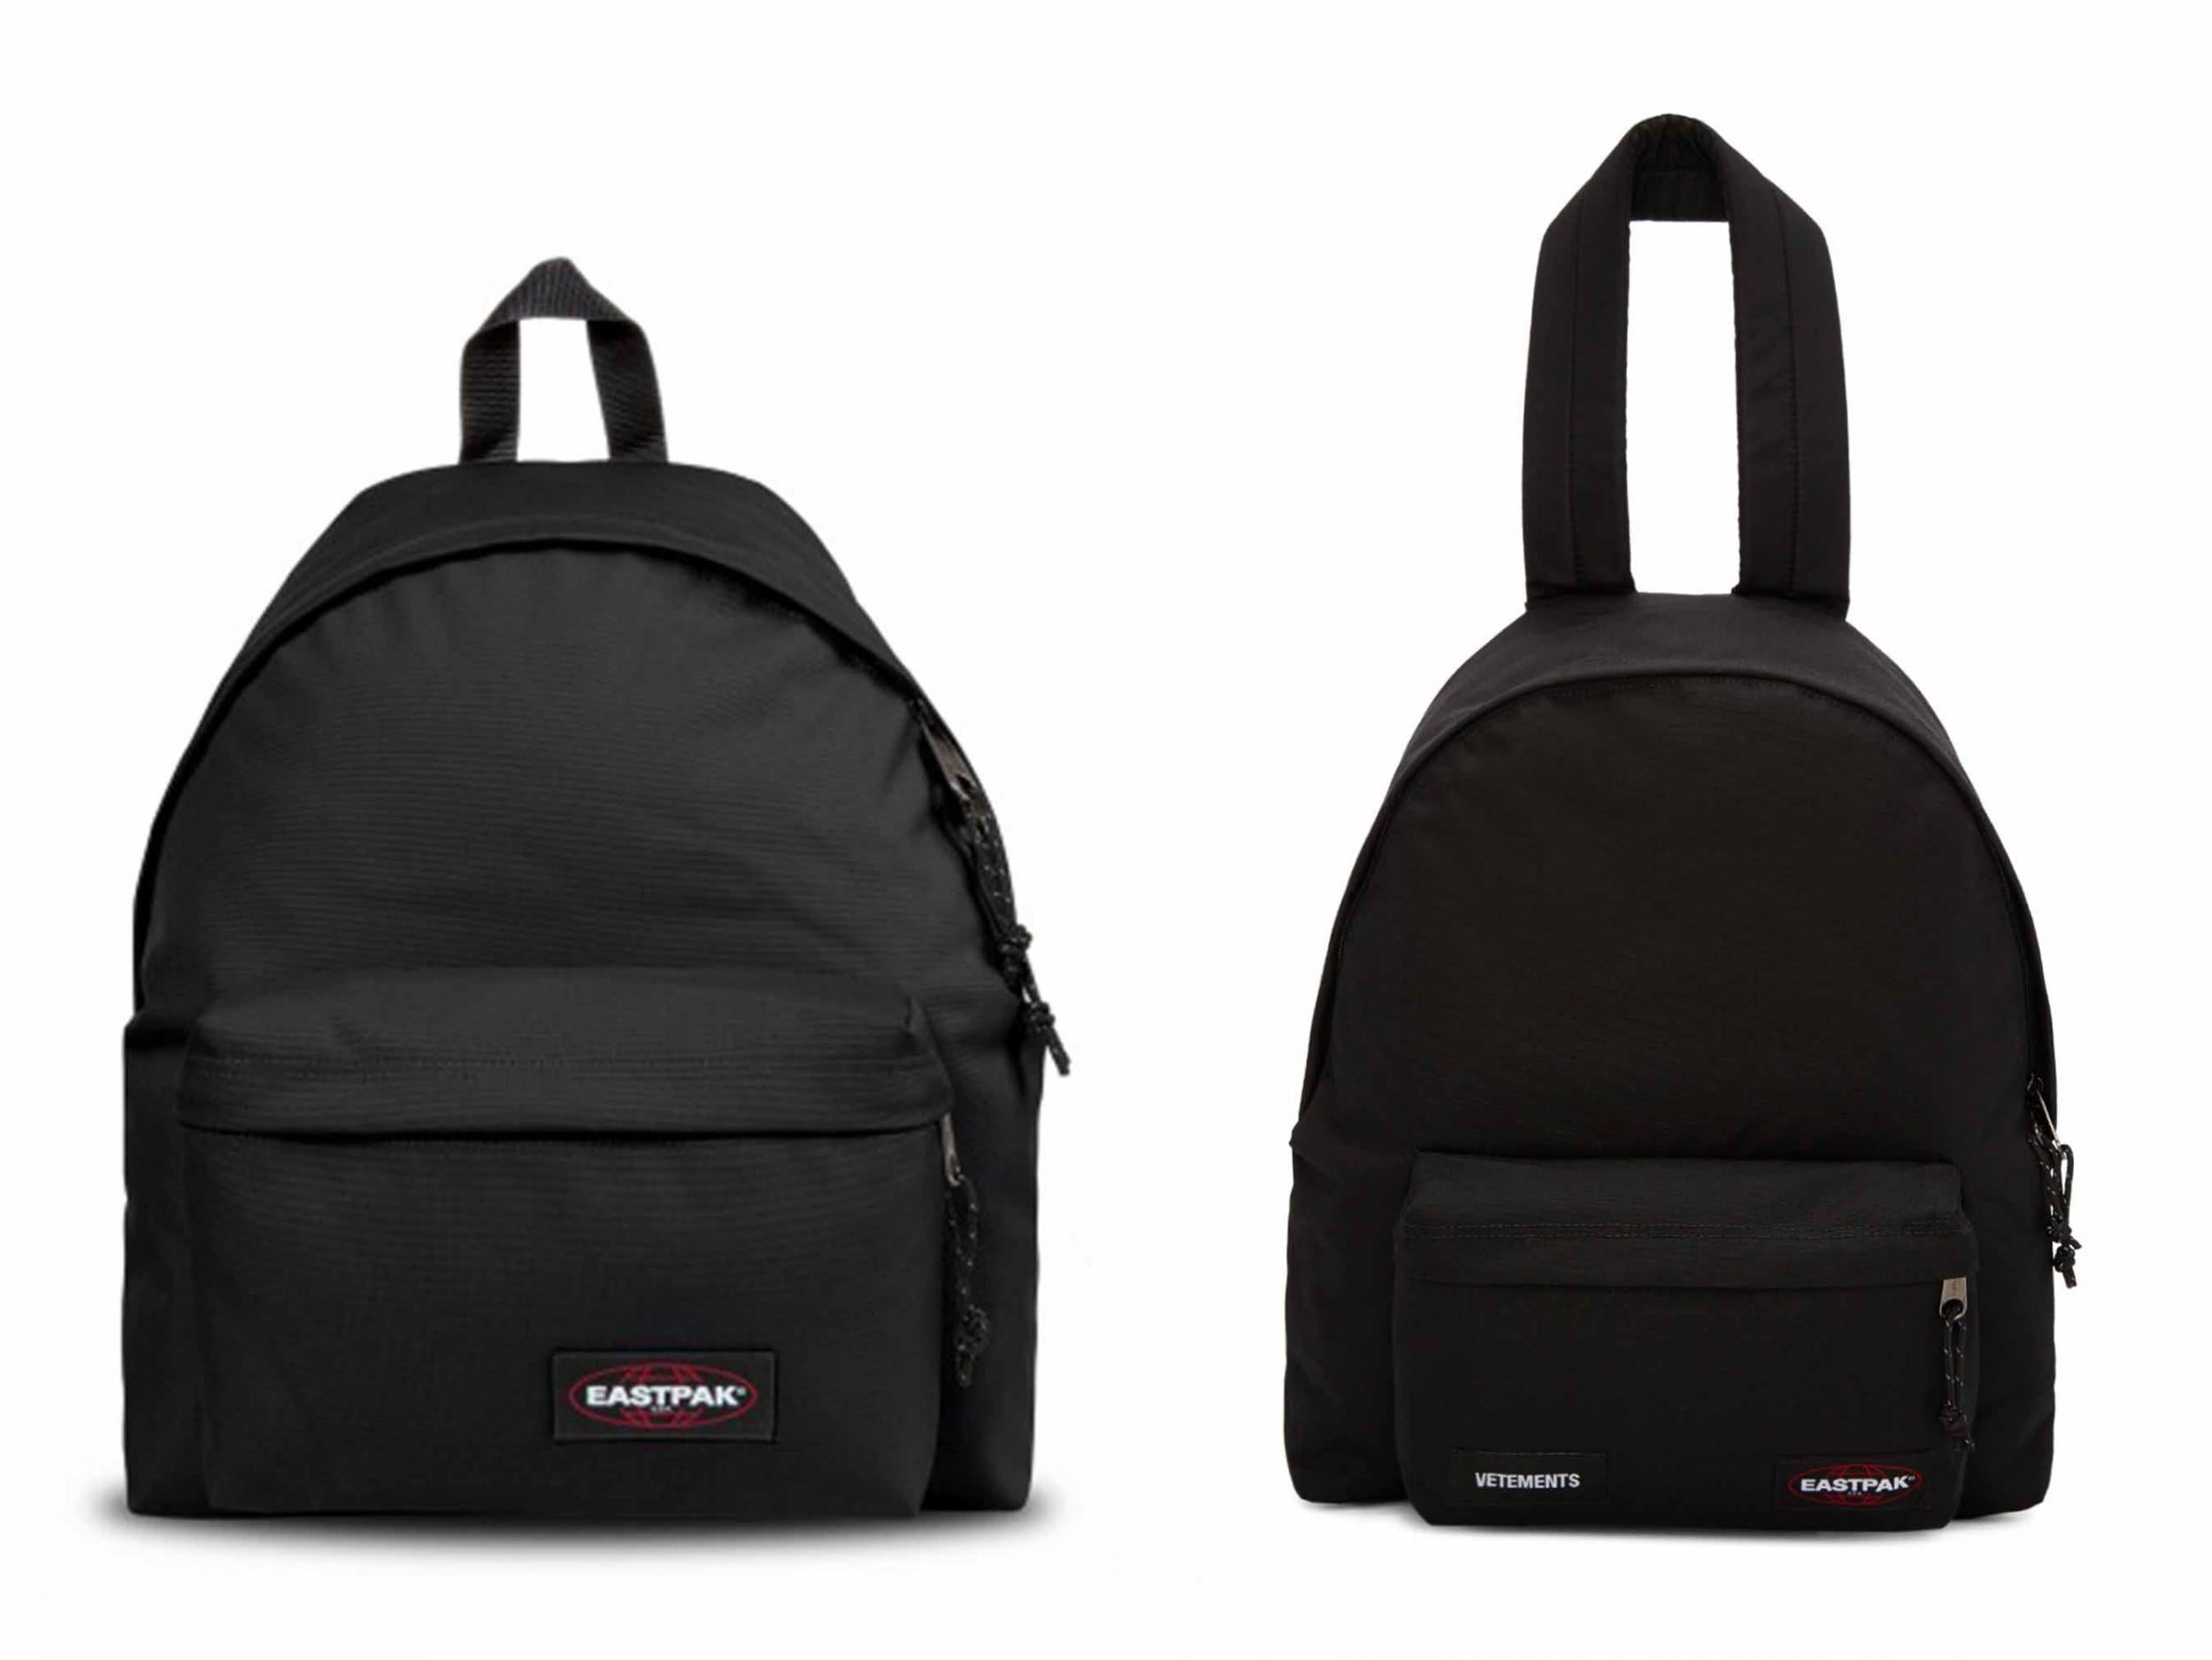 Apart from an oversized top handle and a small Vetements logo, the two bags are near identical